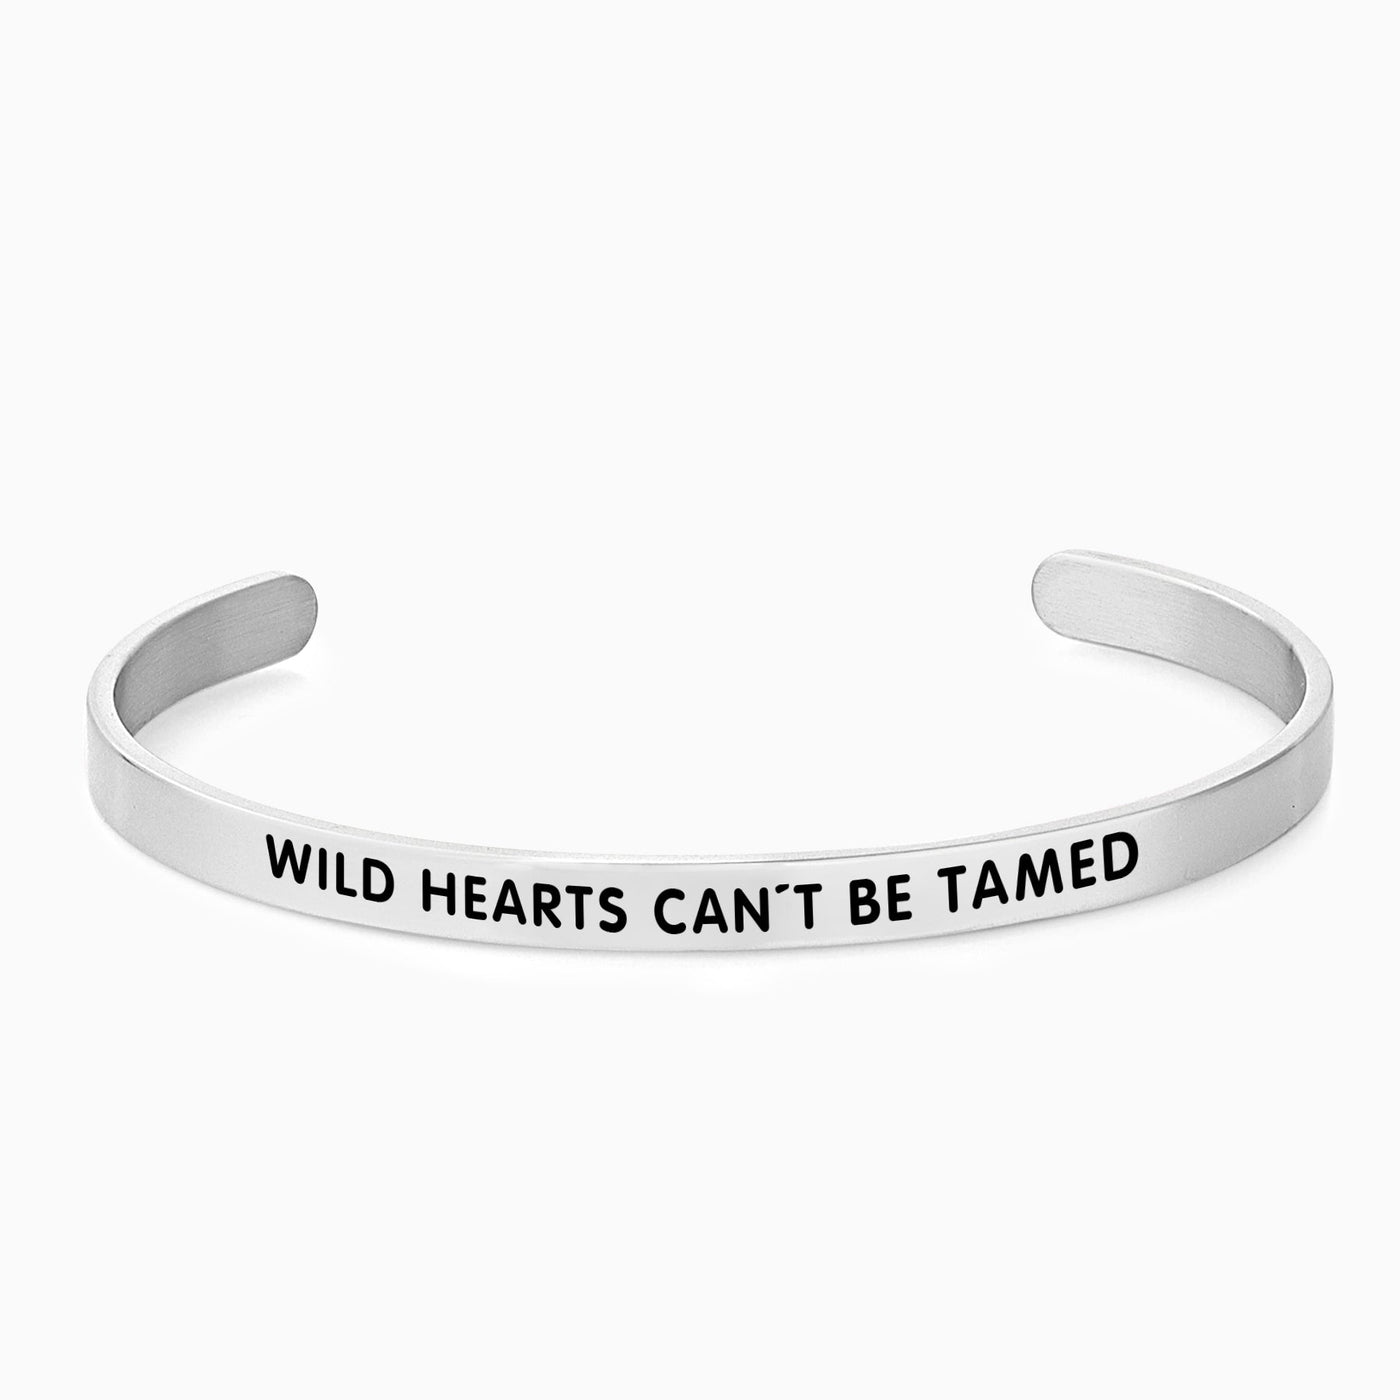 WILD HEARTS CAN'T BE TAMED - OTANTO